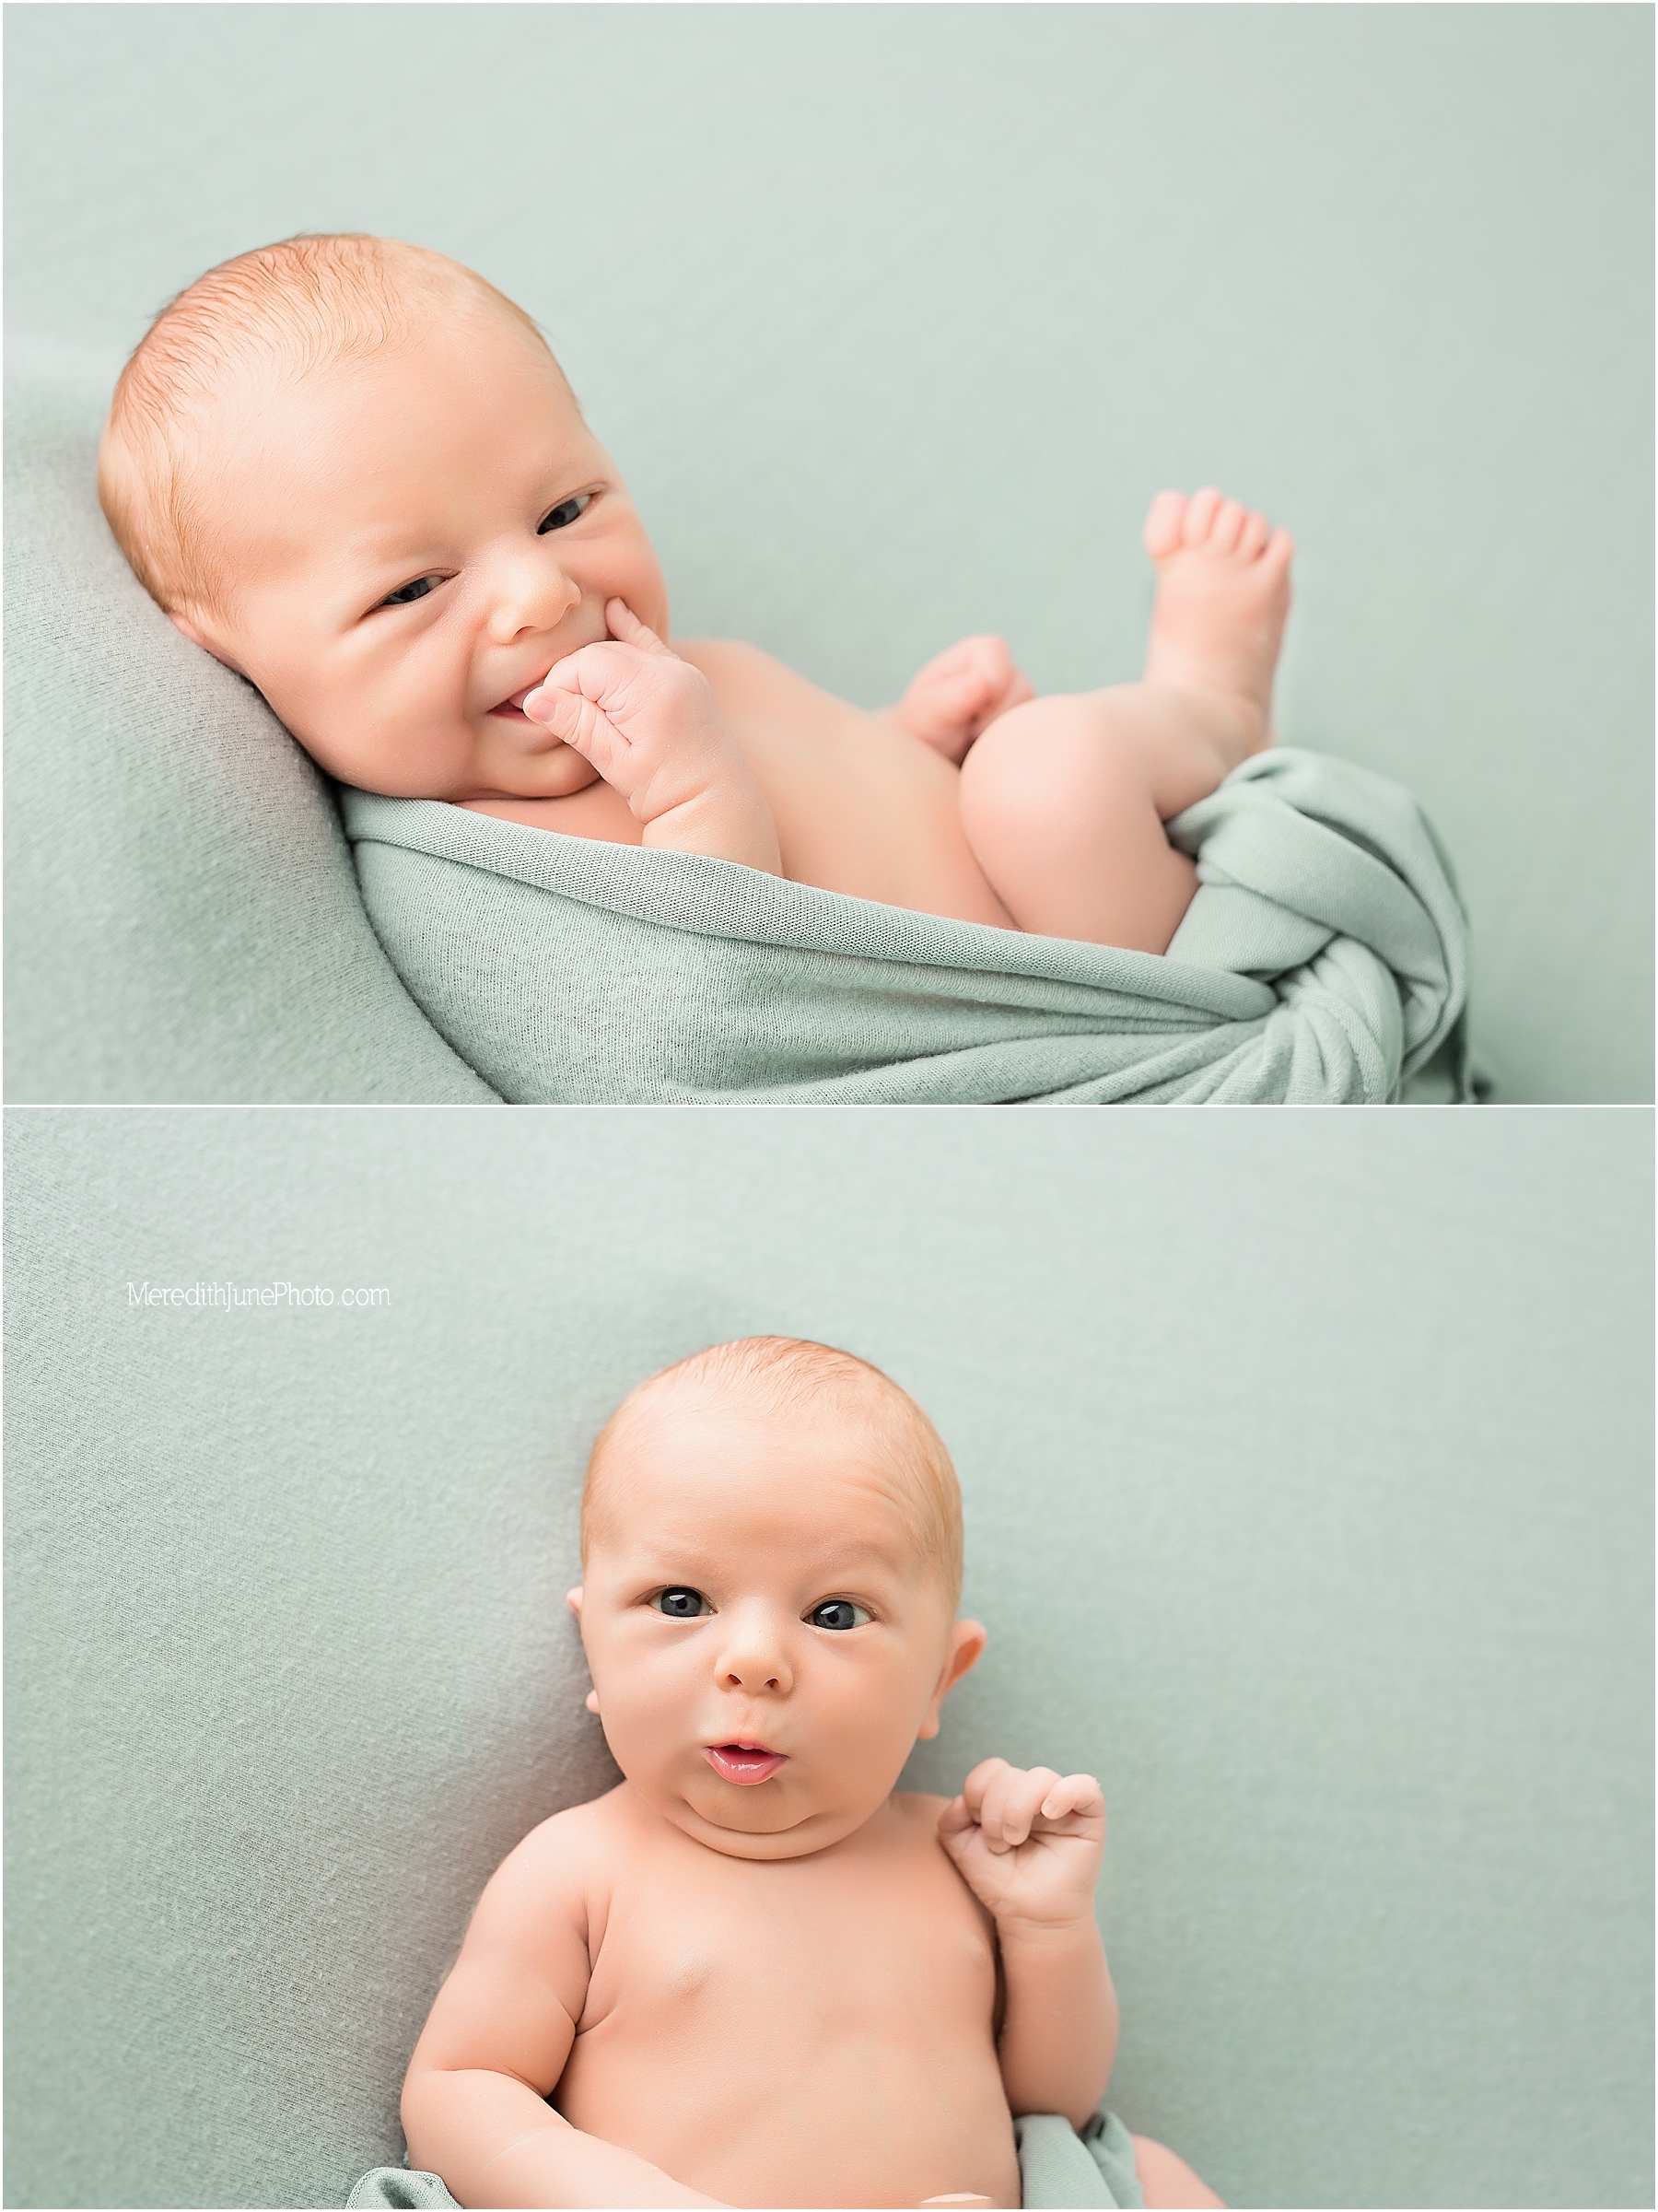 baby with eyes open during newborn photo session